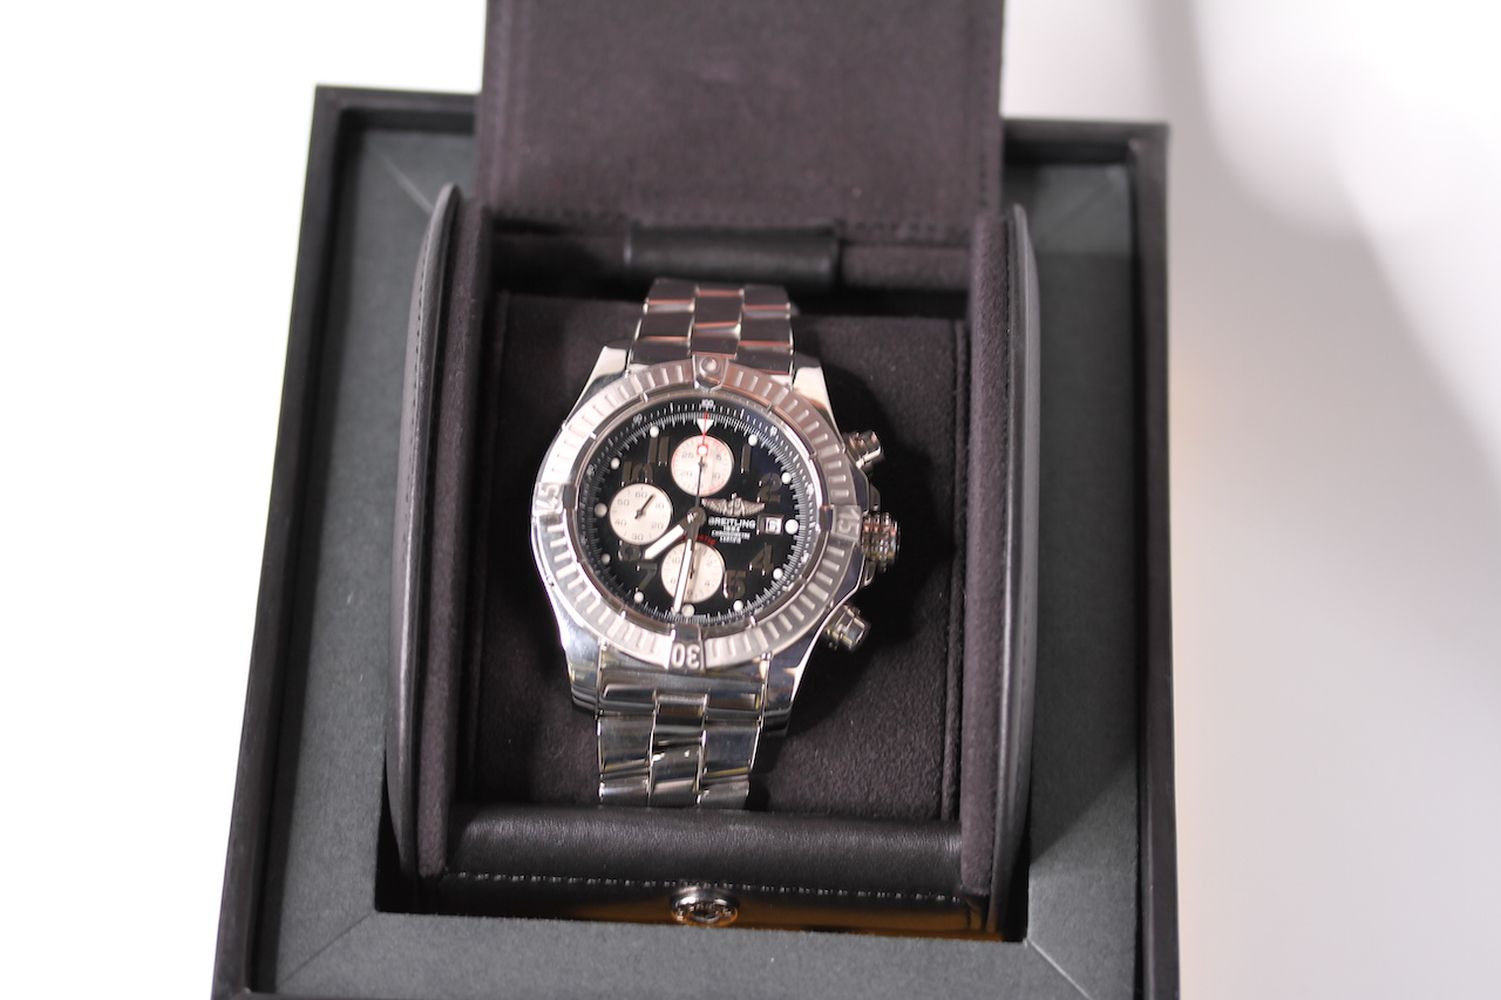 GENTLEMENS BREITLING SUPER AVENGER WRISTWATCH REF A13370 W/BOX & PAPERS, circular black dial with - Image 4 of 5